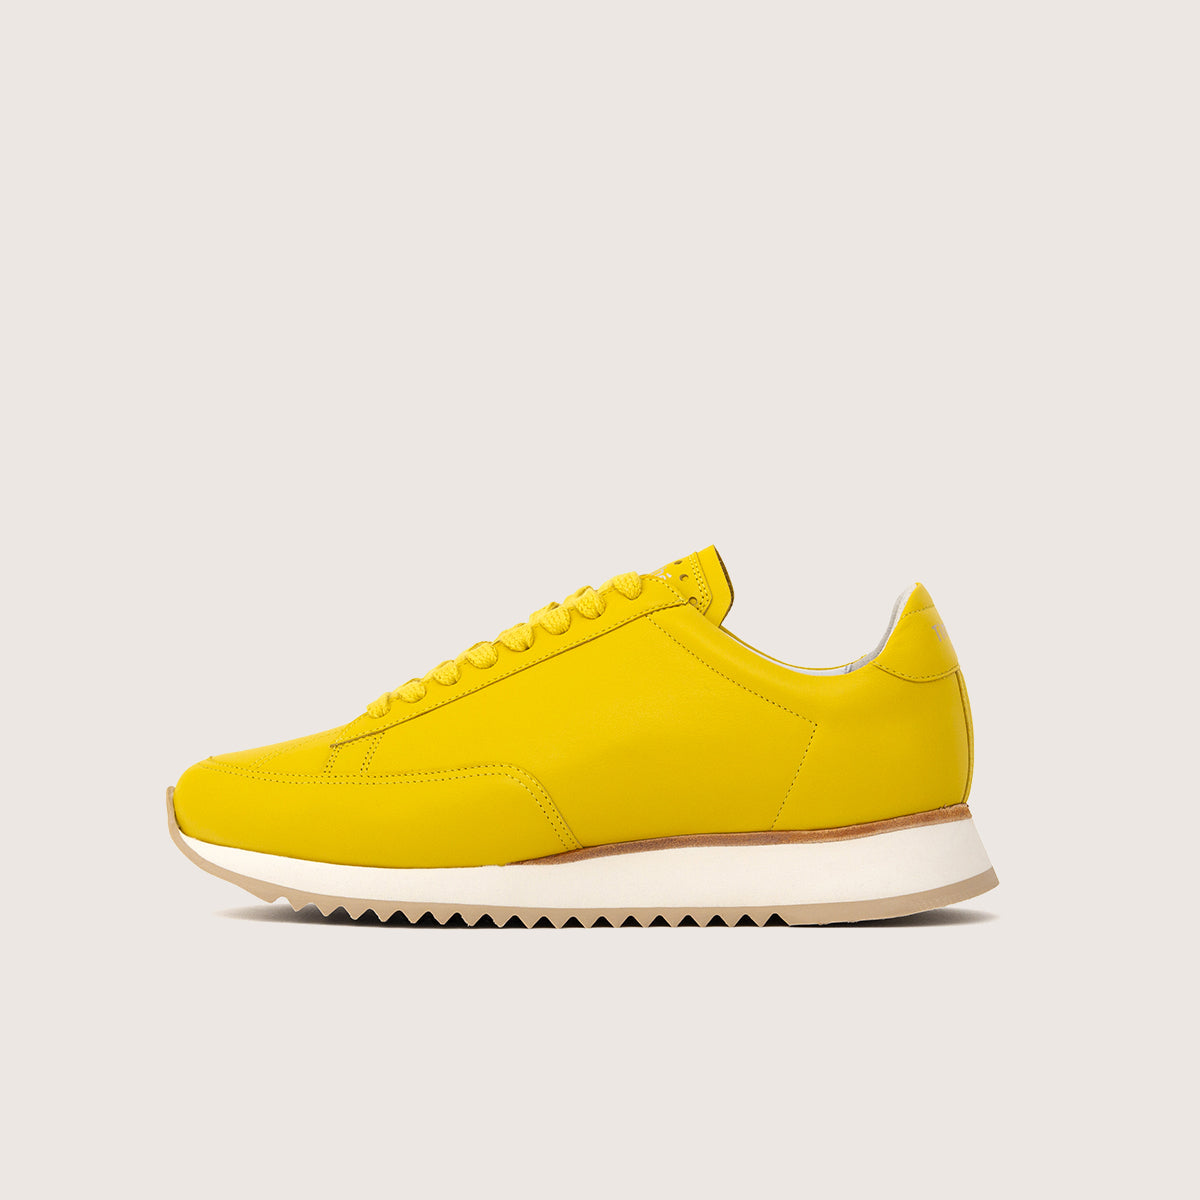 sneaker-cabourg-nappa-butter-yellow-timothee-paris-side-view-lifestyle-brand-big-size-picture-women